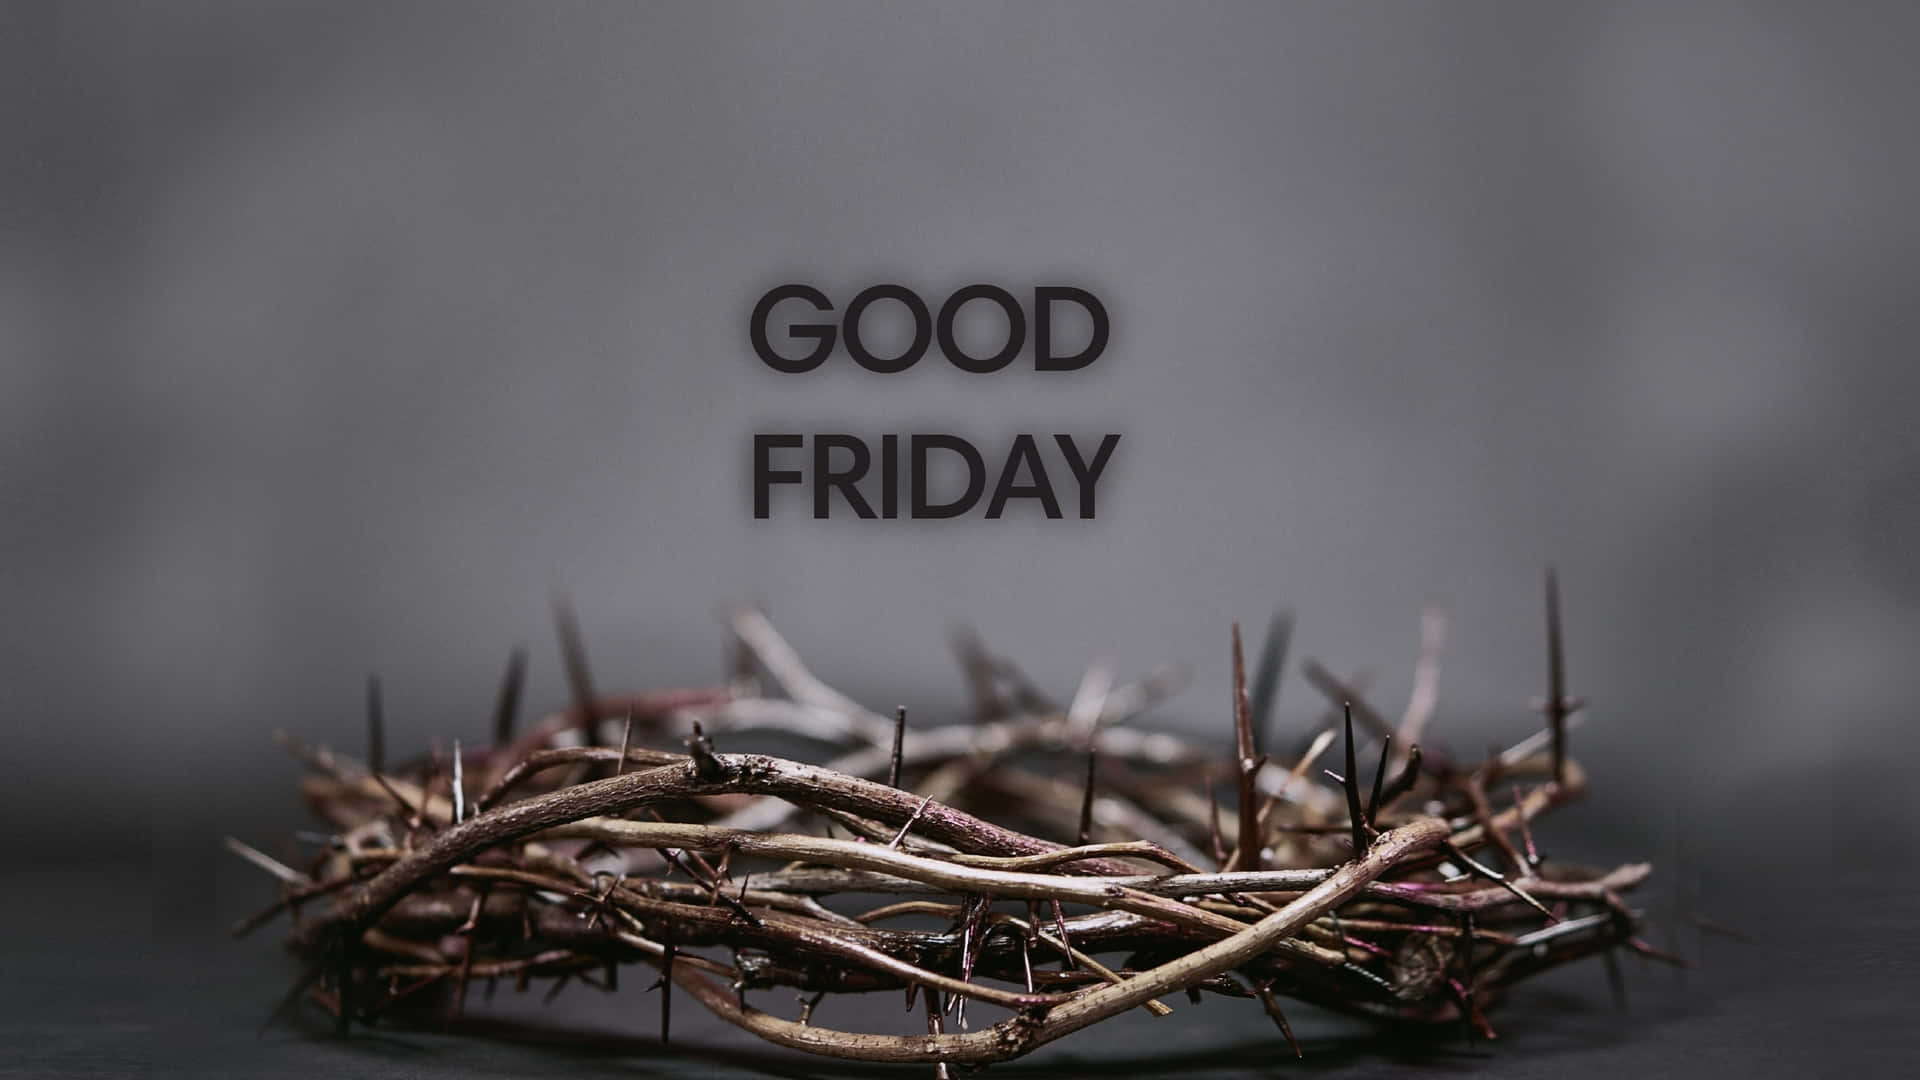 Remembering Christ’s ultimate sacrifice on Good Friday